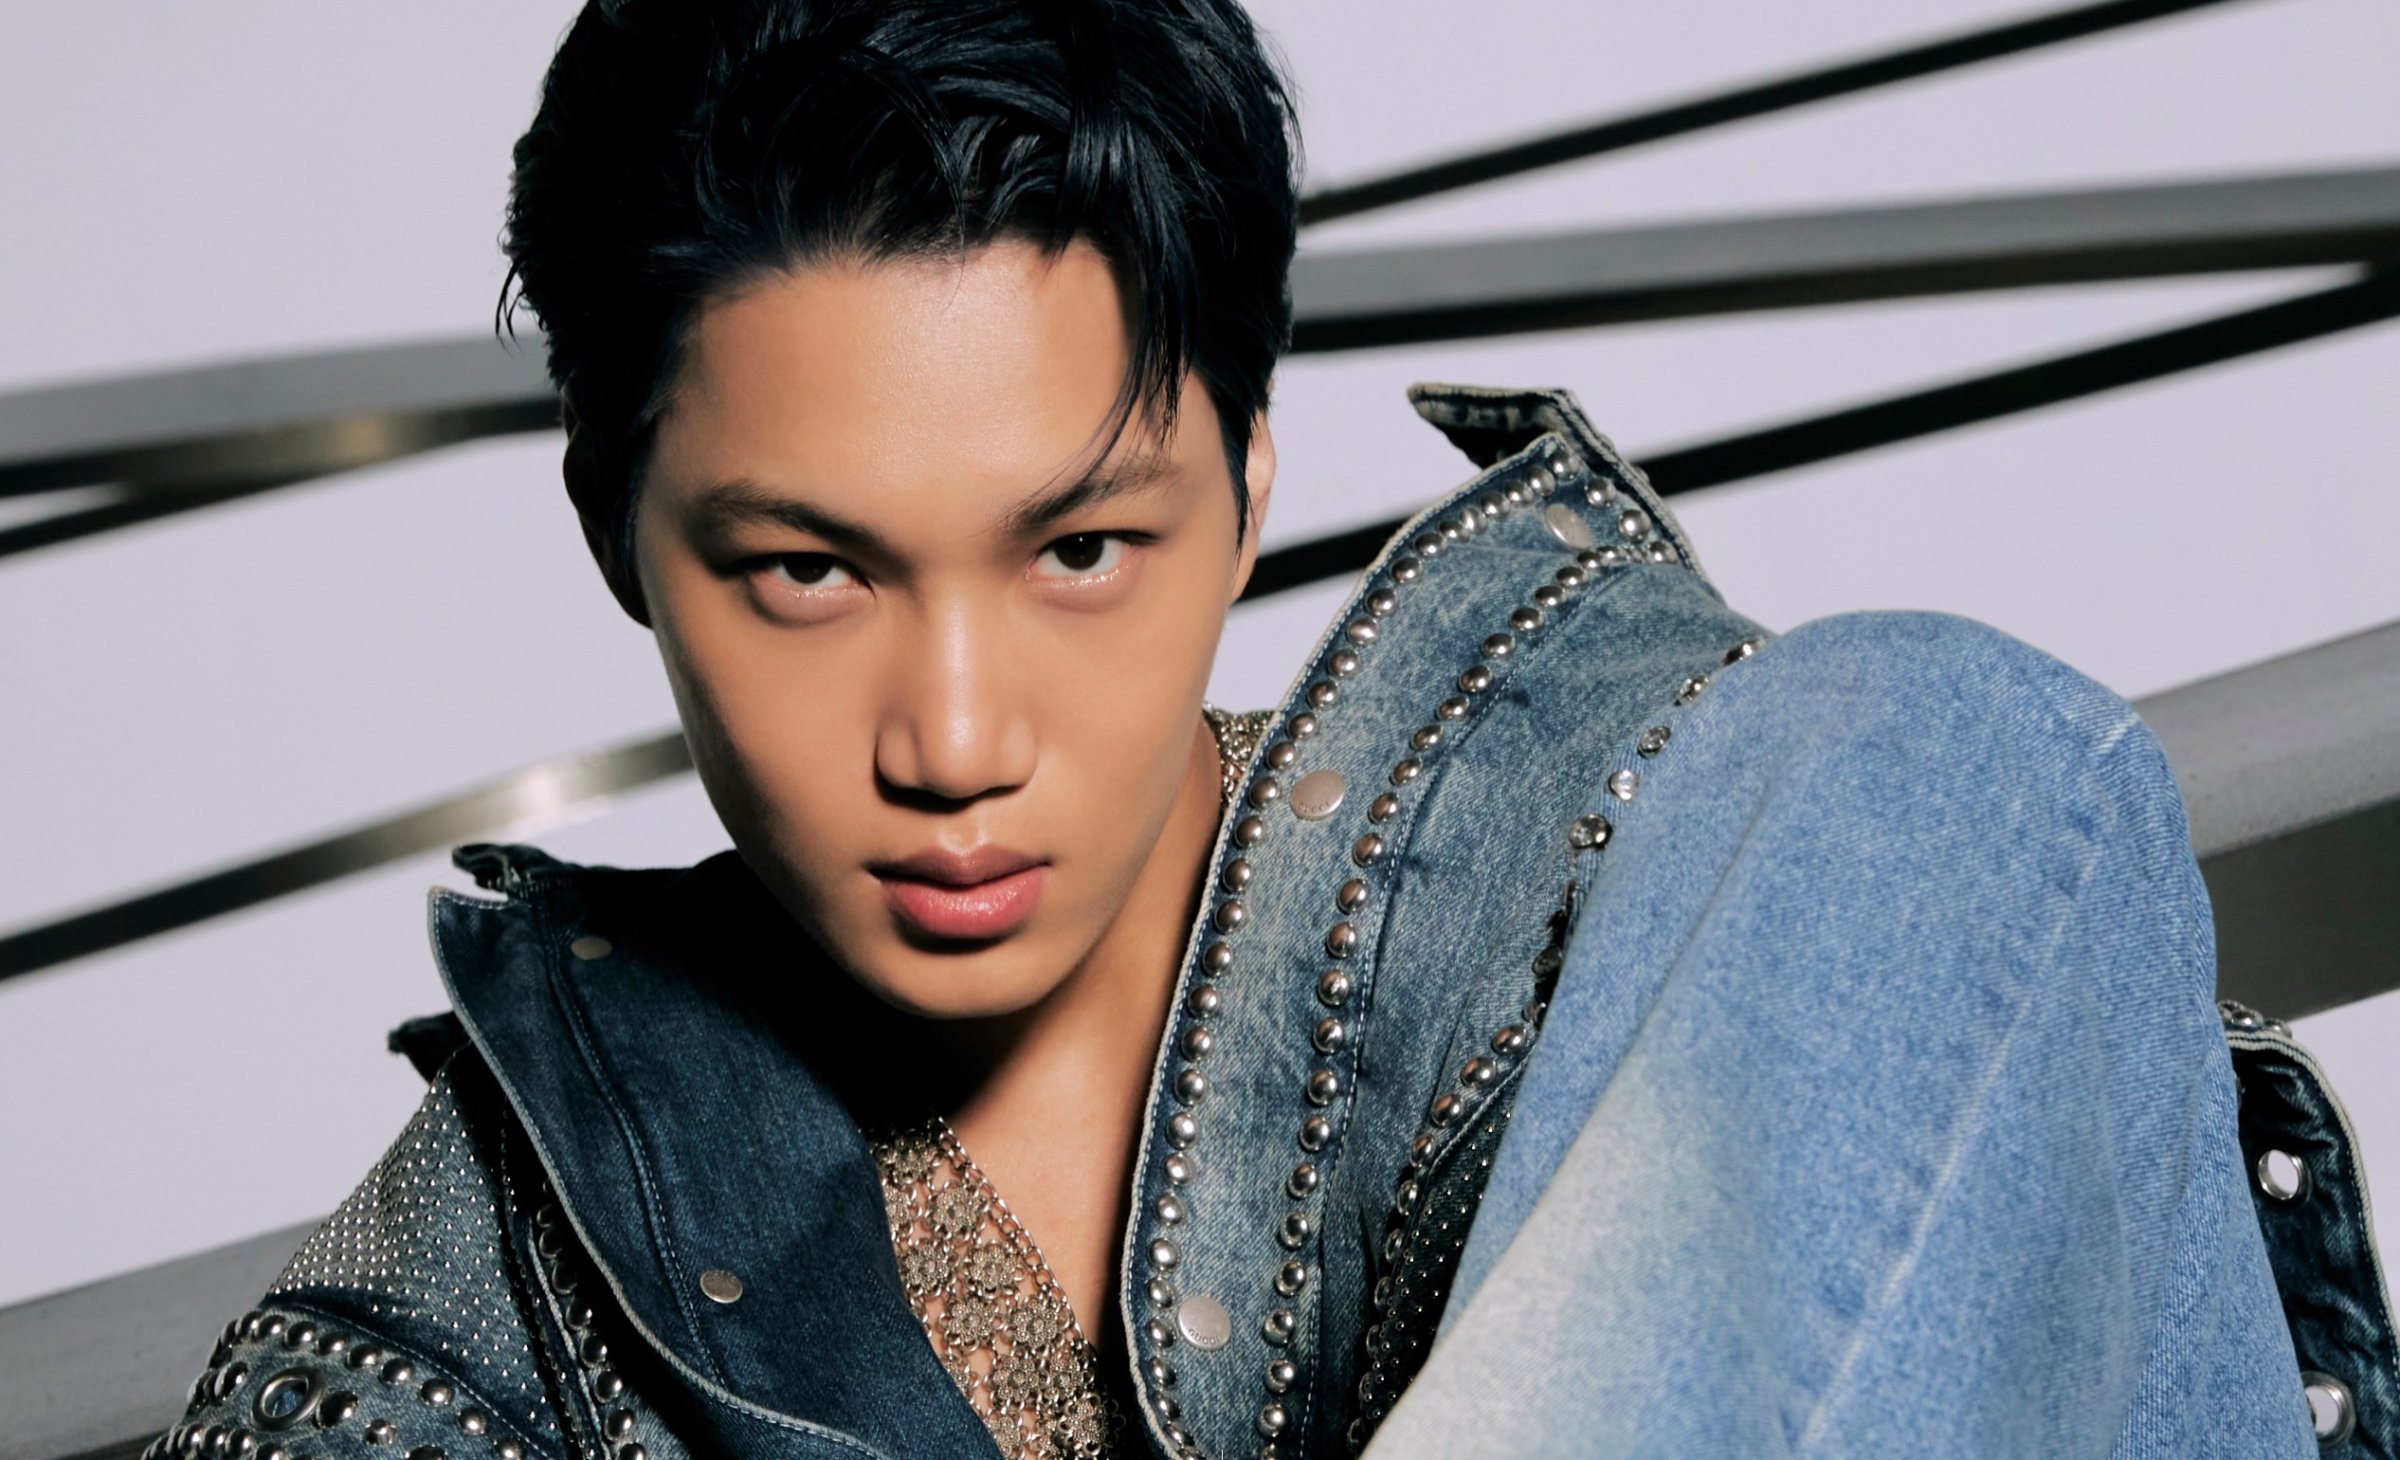 EXO Kai's 3rd mini-album 'Rover' hits #1 on iTunes charts in 45 countries